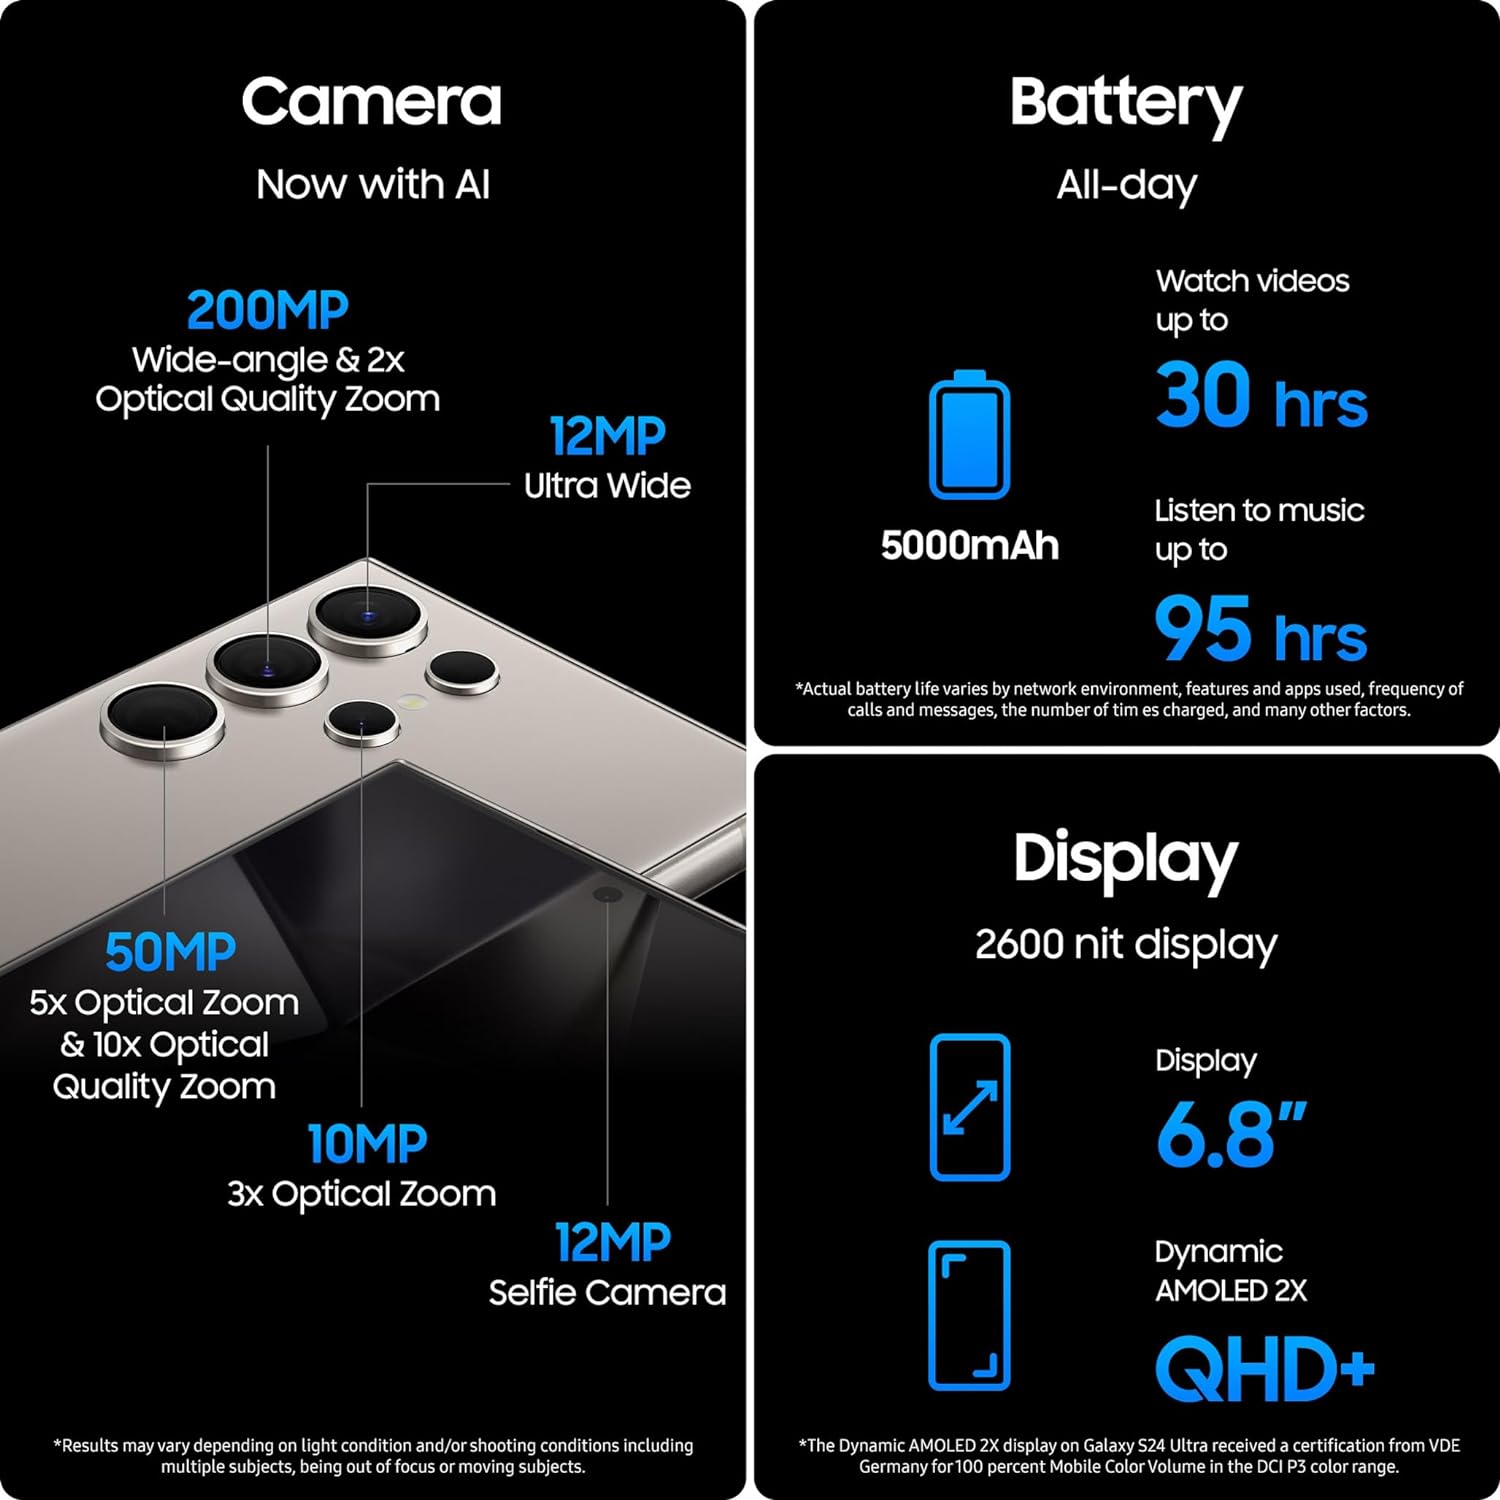 The image seems to be an advertisement or an informational graphic for a smartphone, highlighting its key features:
- Camera: The camera system includes multiple sensors with AI capabilities. The main sensor is a 200MP wide-angle camera with a 2x optical zoom. There is also a 12MP ultra-wide sensor, a 50MP sensor that offers 5x optical zoom and 10x optical quality zoom, and a 10MP sensor with 3x optical zoom. Additionally, there is a 12MP selfie camera.
- Battery: The battery life is emphasized as being capable of all-day duration. It has a capacity of 5000mAh with video playback for up to 30 hours and music listening for up to 95 hours. It also notes that actual battery life can vary.
- Display: The features of the display include a 2600 nit brightness level, a size of 6.8 inches, and it is a Dynamic AMOLED 2X QHD+ screen. The footnote mentions that the Dynamic AMOLED 2X display on the Galaxy S24 Ultra received a certification from VDE Germany for 100 percent Mobile Color Volume in the DCI-P3 color range.
The footnote under the camera section indicates that the results of the camera may vary depending on light conditions or shooting conditions including moving subjects, and the one under the display section talks about the certification the display received.
The phone itself, or at least part of it, appears at the top section of the image, showcasing the rear camera array.